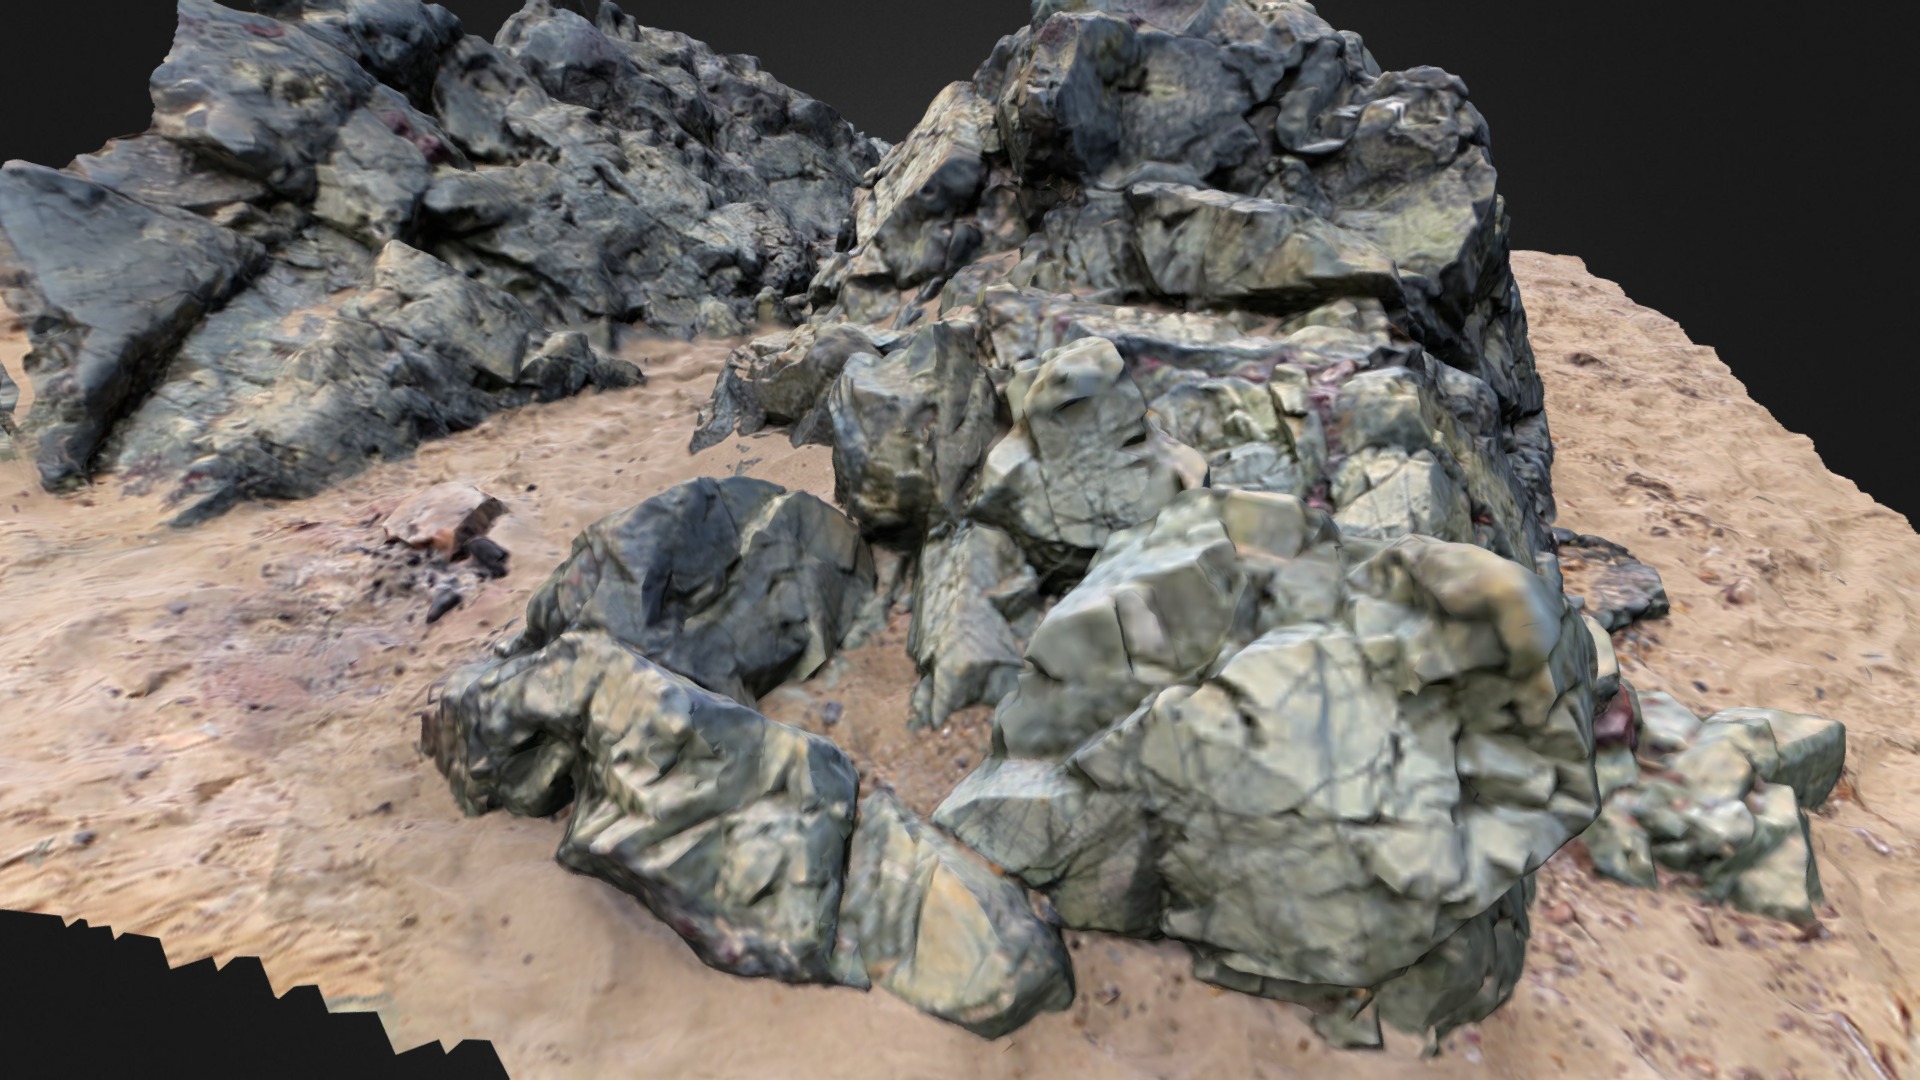 3D model llanddwyn Rock formation - This is a 3D model of the llanddwyn Rock formation. The 3D model is about a group of rocks.